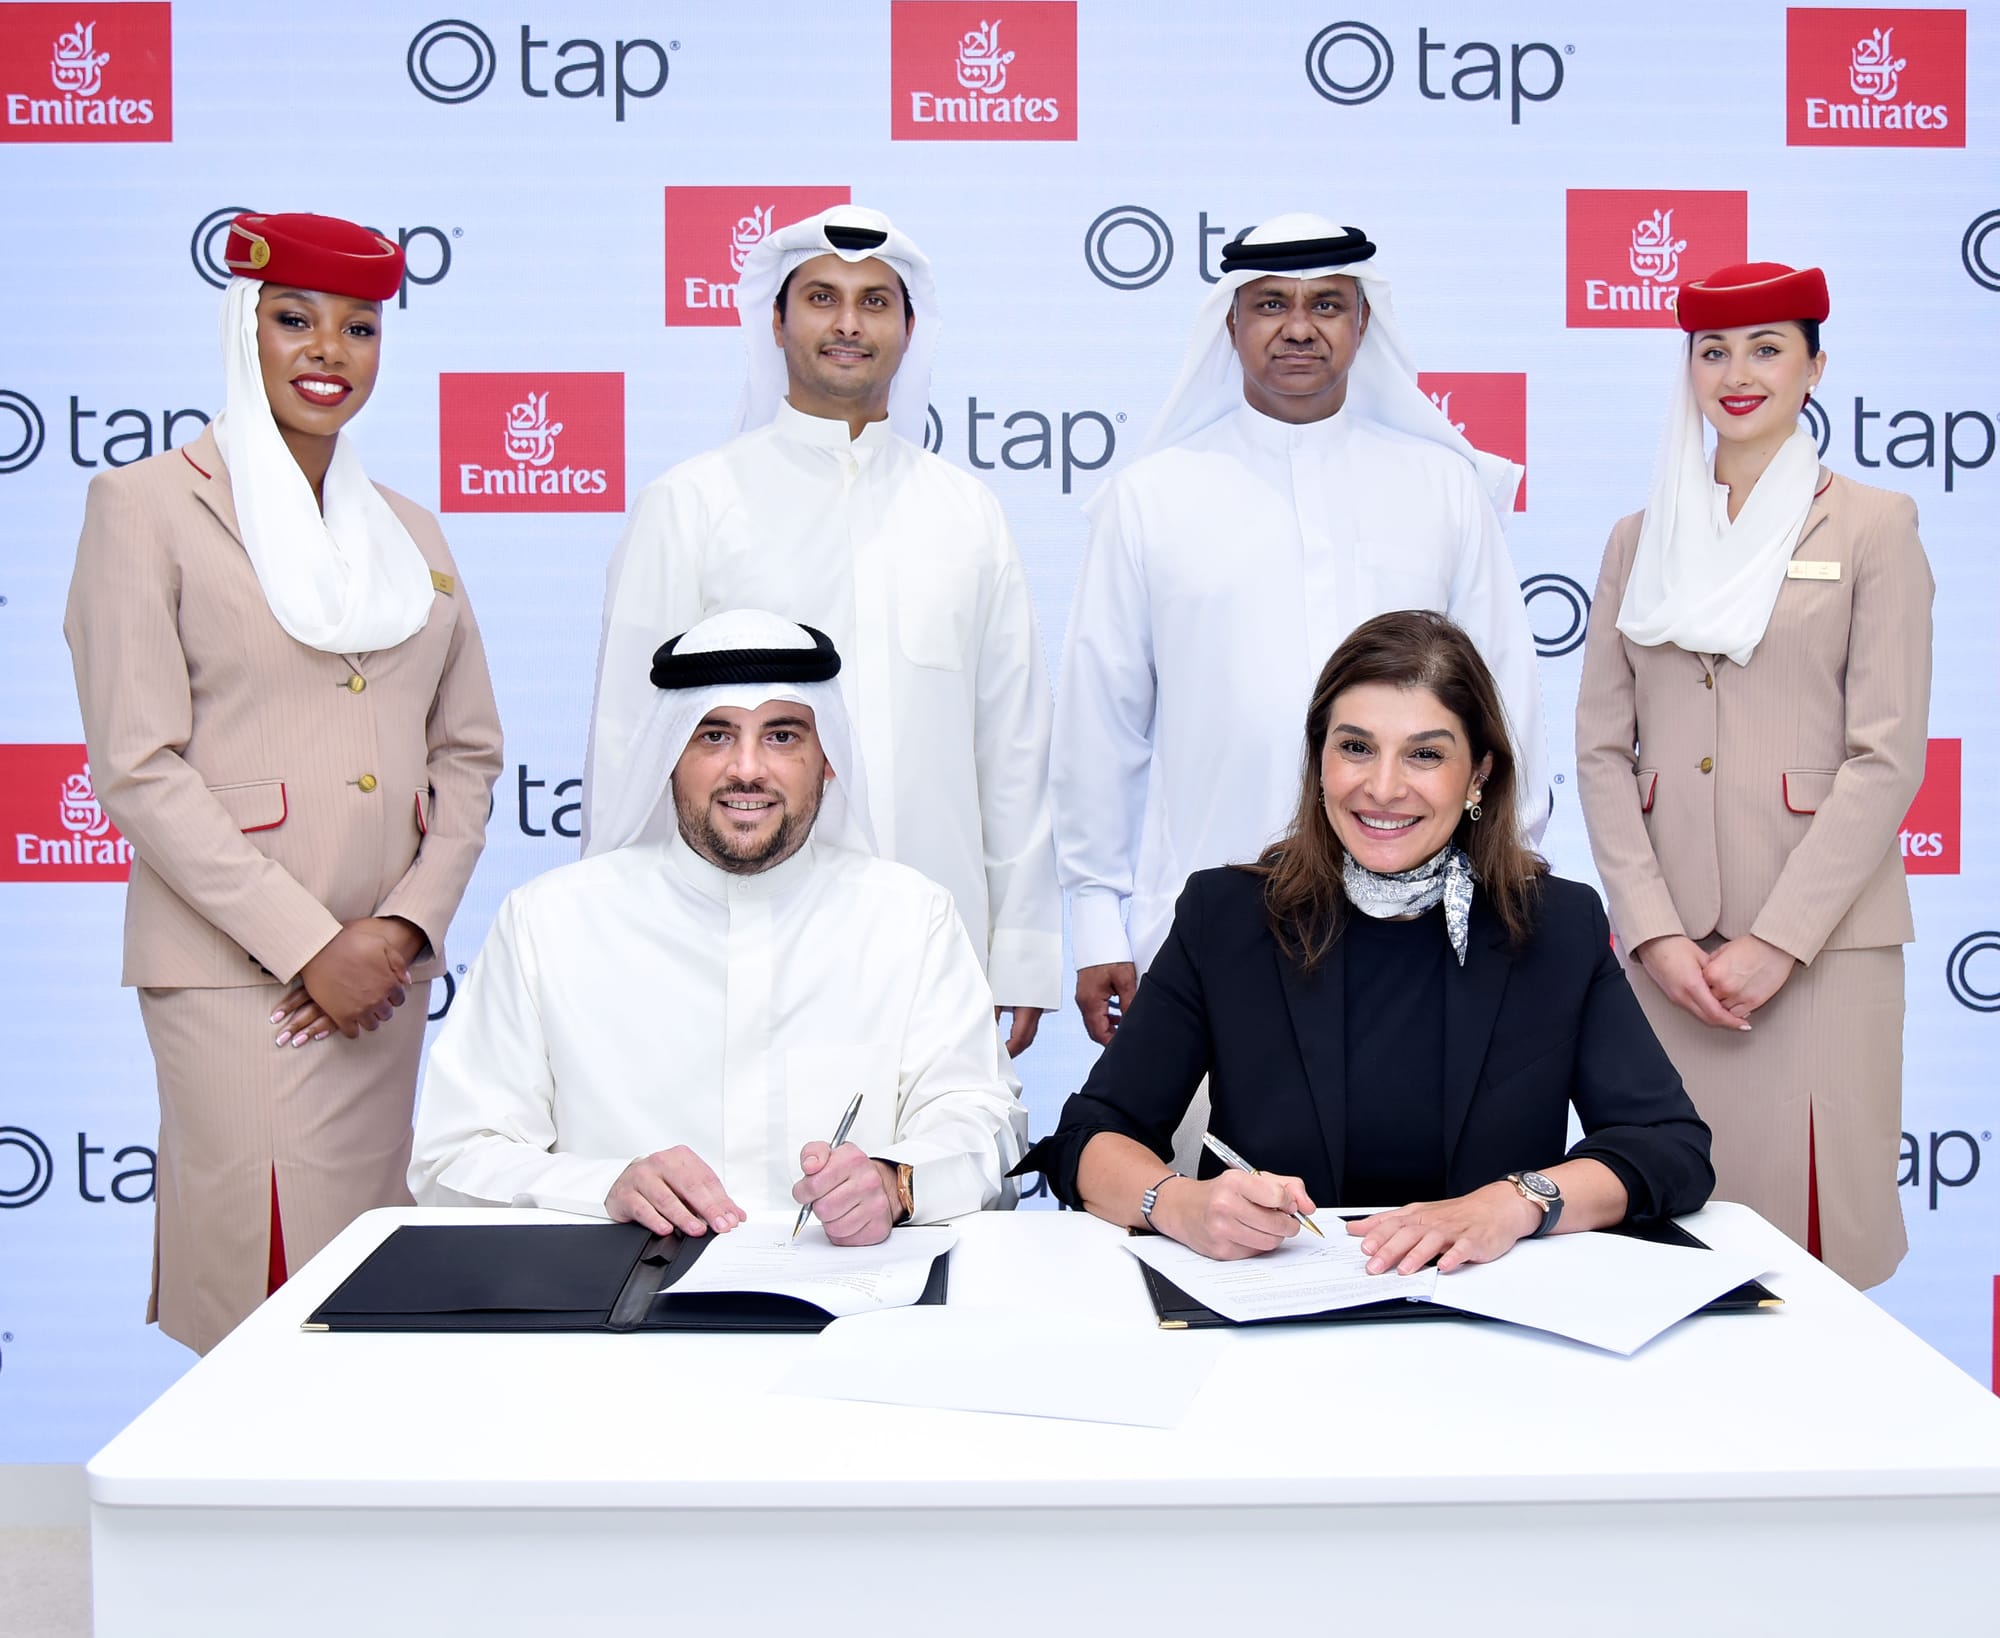 This MOU was signed by Anwar Marafi, Head of Value Added Services at Tap Payments & Dina Al Herais, Emirates' Vice President Commercial Products, Business and Leisure, Also present Ahmad Alwazzan, Managing Director of the UAE at Tap Payments, alongside Nabil Sultan, Executive Vice President Passenger Sales and Country Management at Emirates